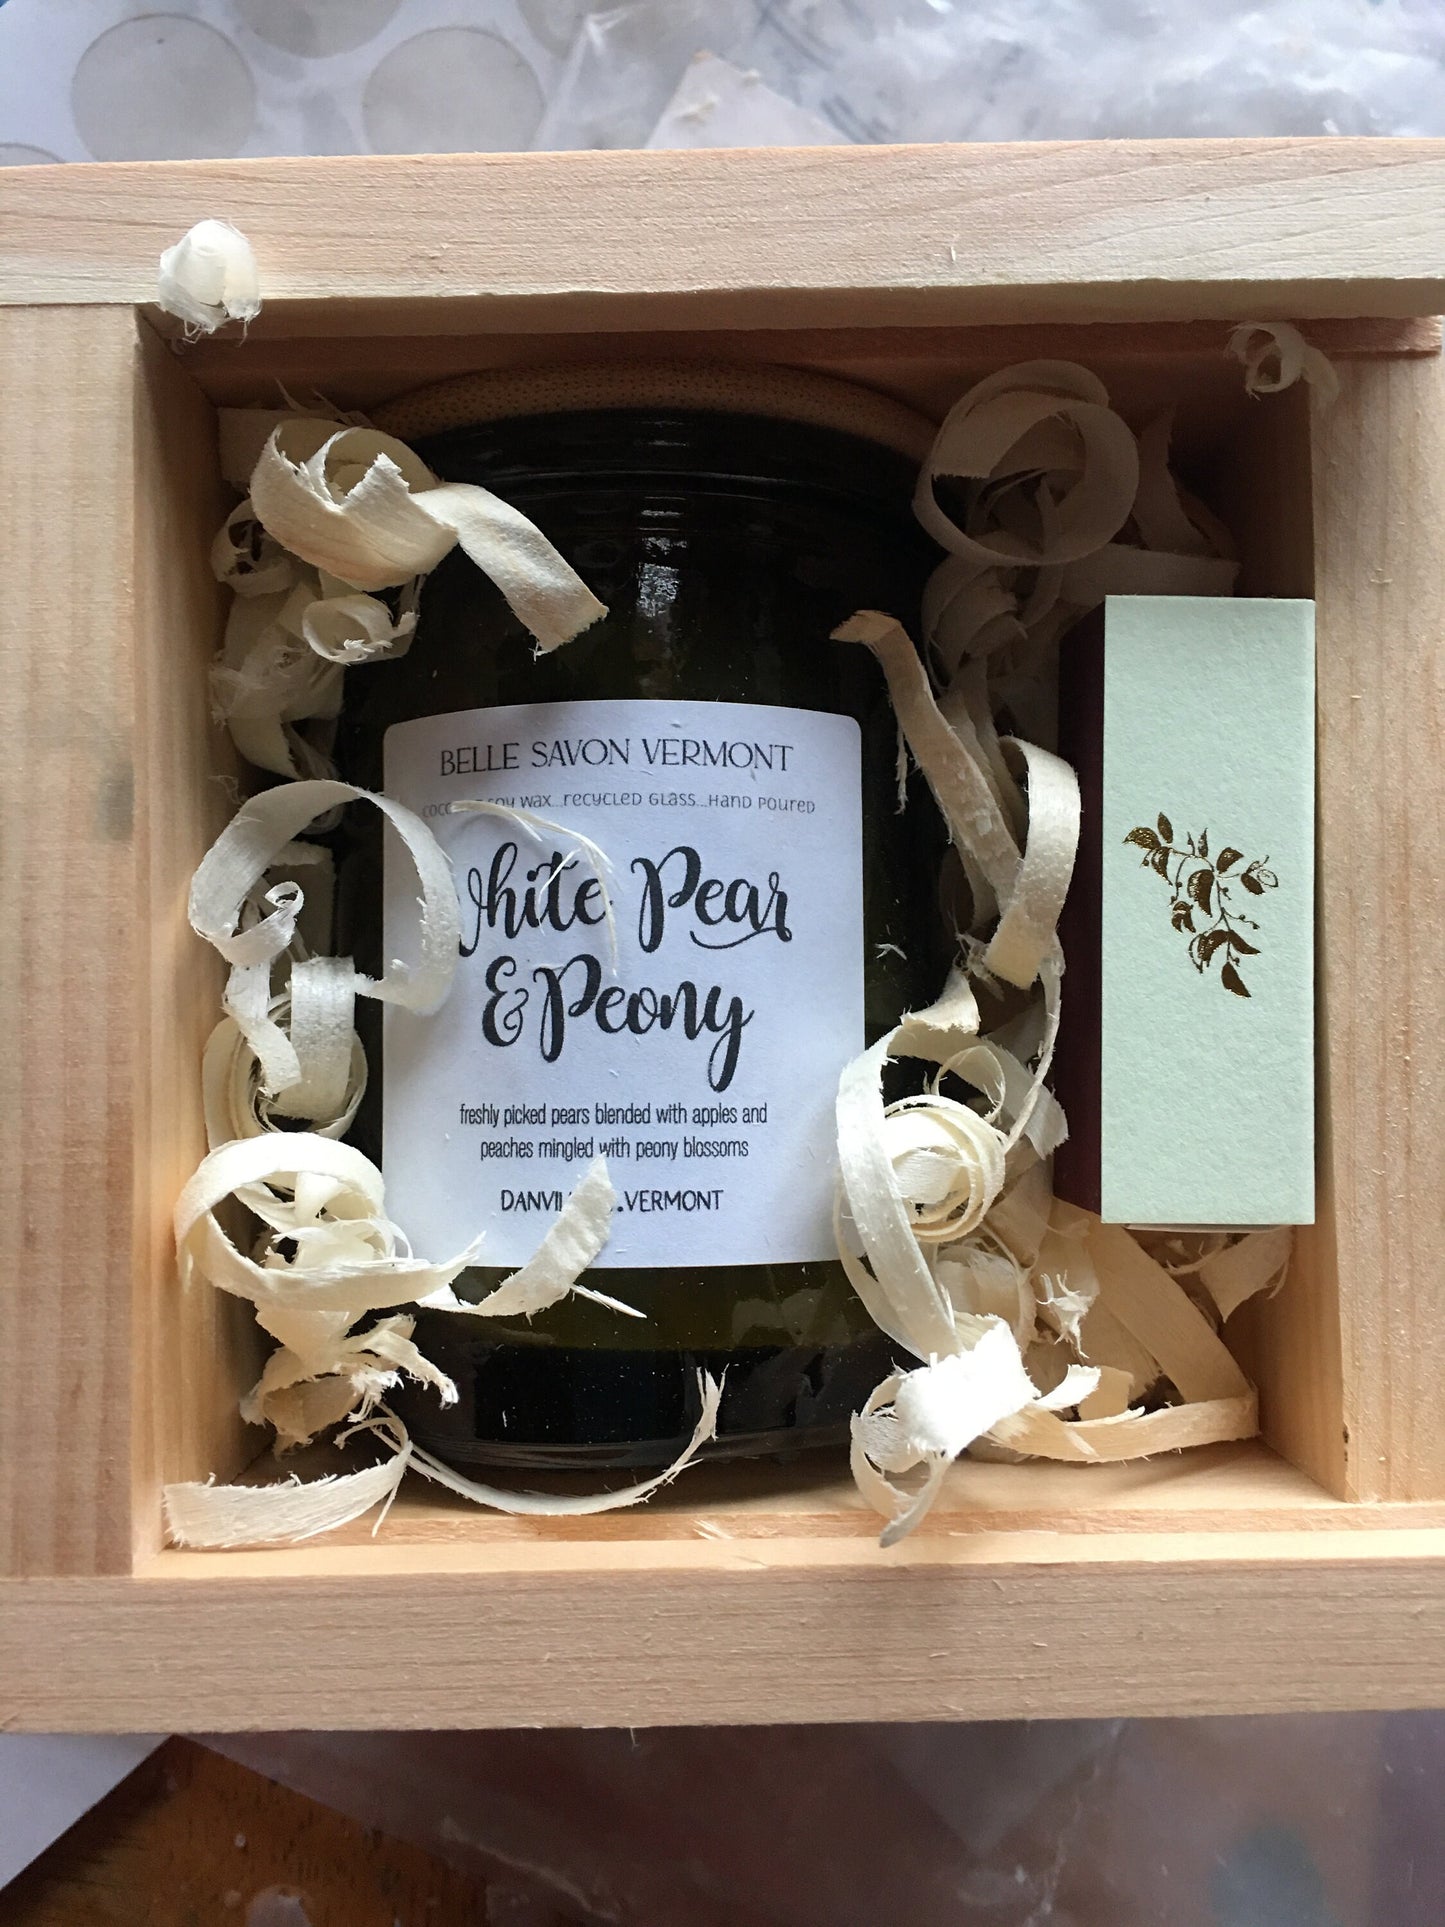 Vermont Candle Gift Set - 6oz Recycled Jar in Keepsake VT Handmade Wooden Box-Vermont Candle- Hand-poured coconut Soy Wax Blend Candle